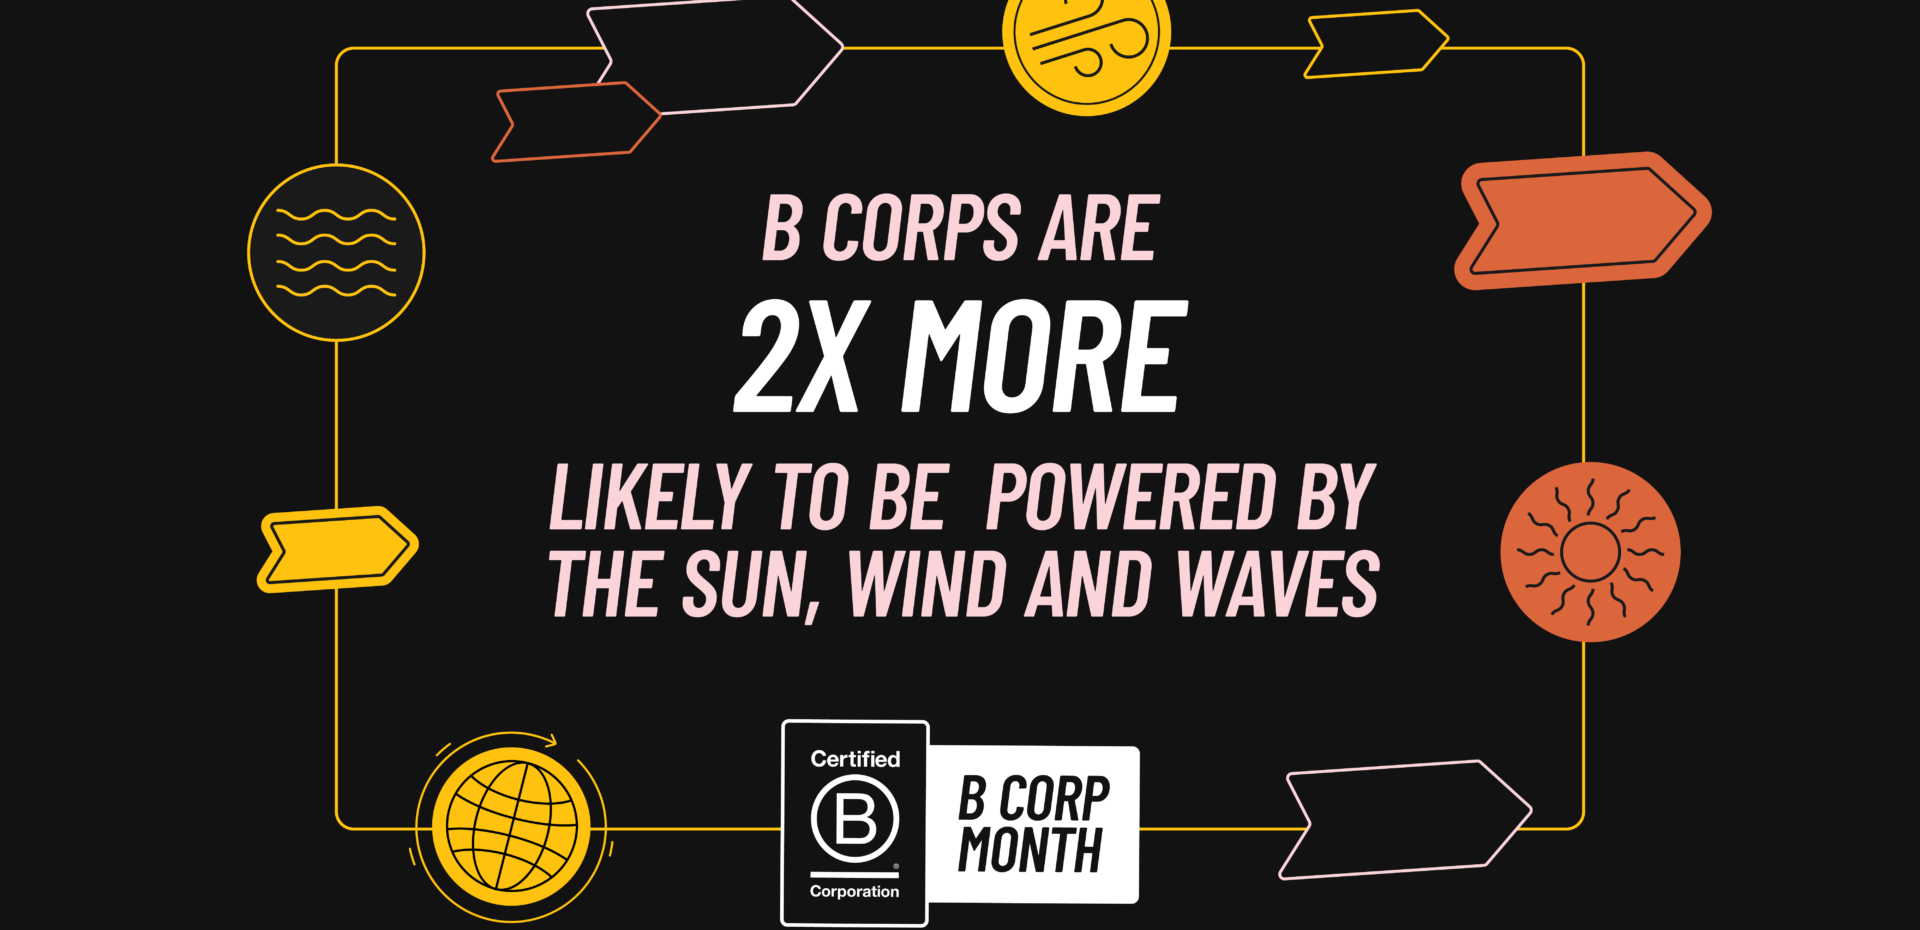 B Corps are two times more likely to be powered by the sun, wind, and waves